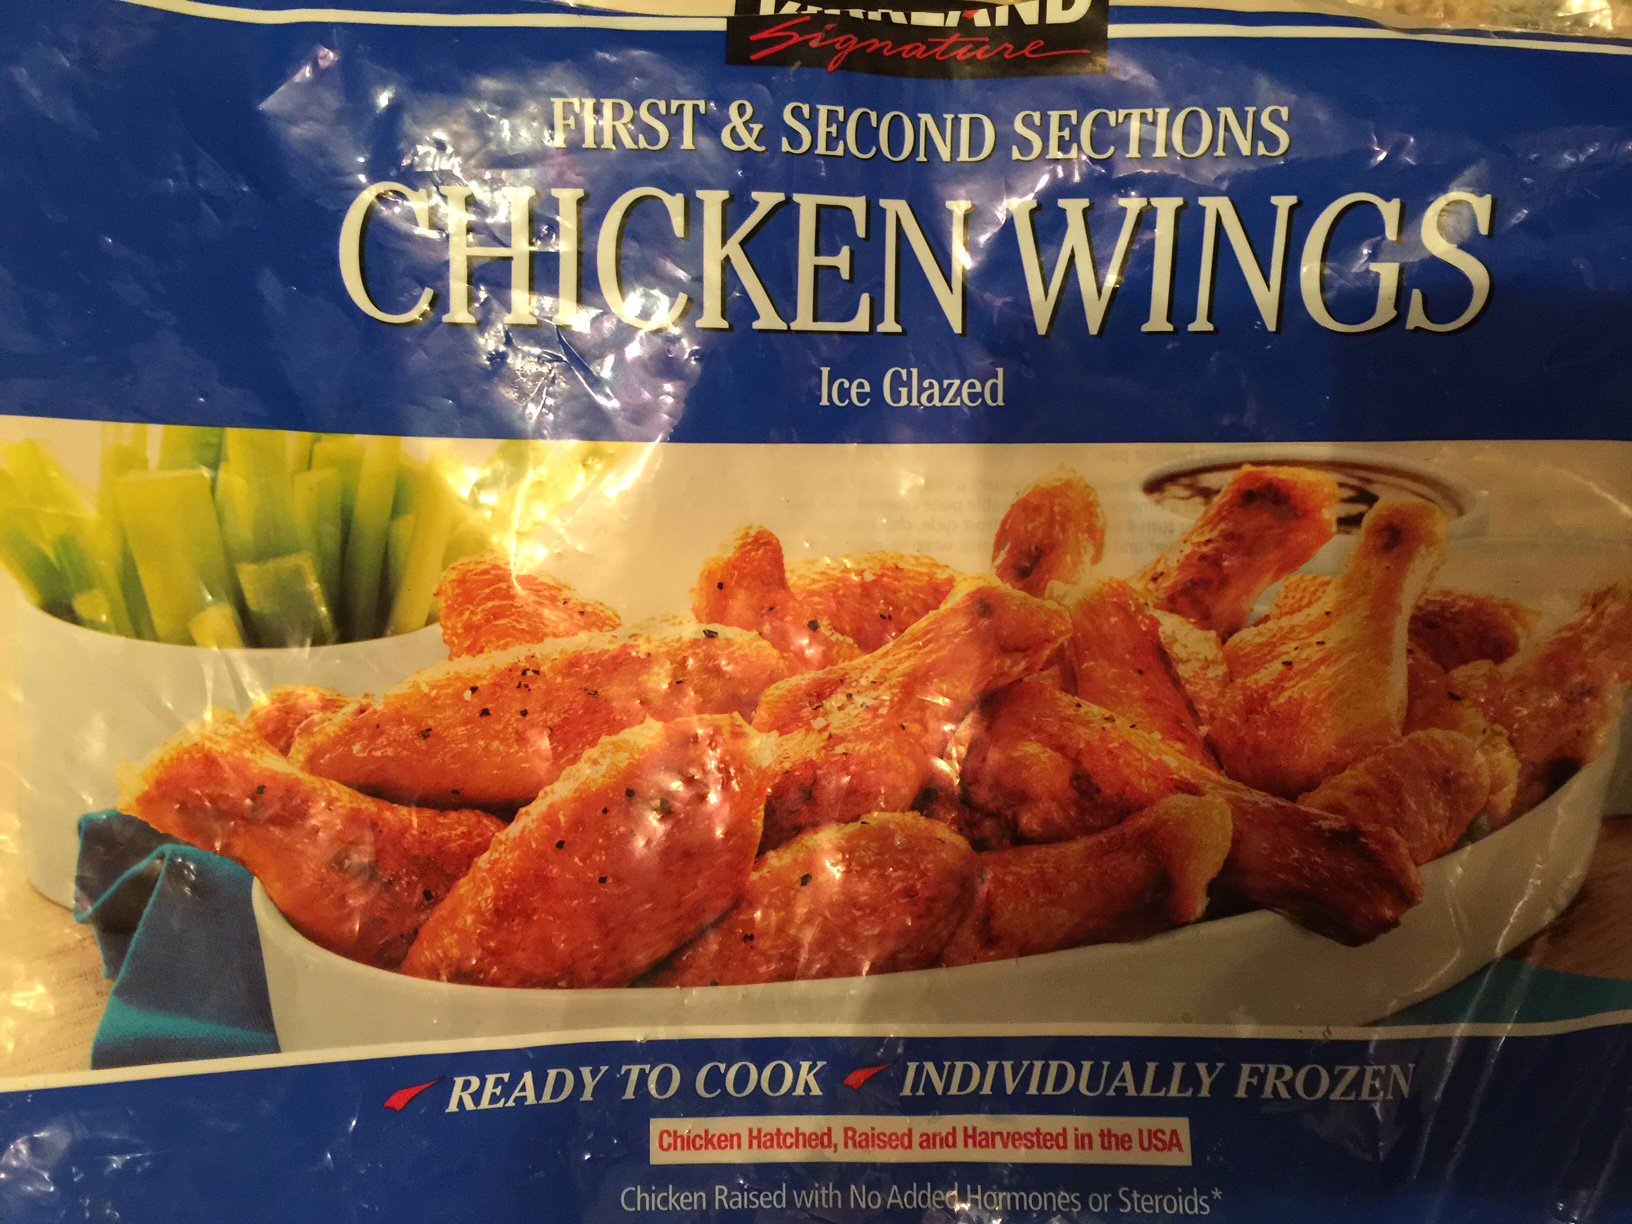 Costco Chicken Wings : Costco 382872 Kirkland Signature Chicken Wings Bag Costcochaser : As salt with creating a perdue buffalo style chicken wings from costco and delivered straight to my dorm by instacart.